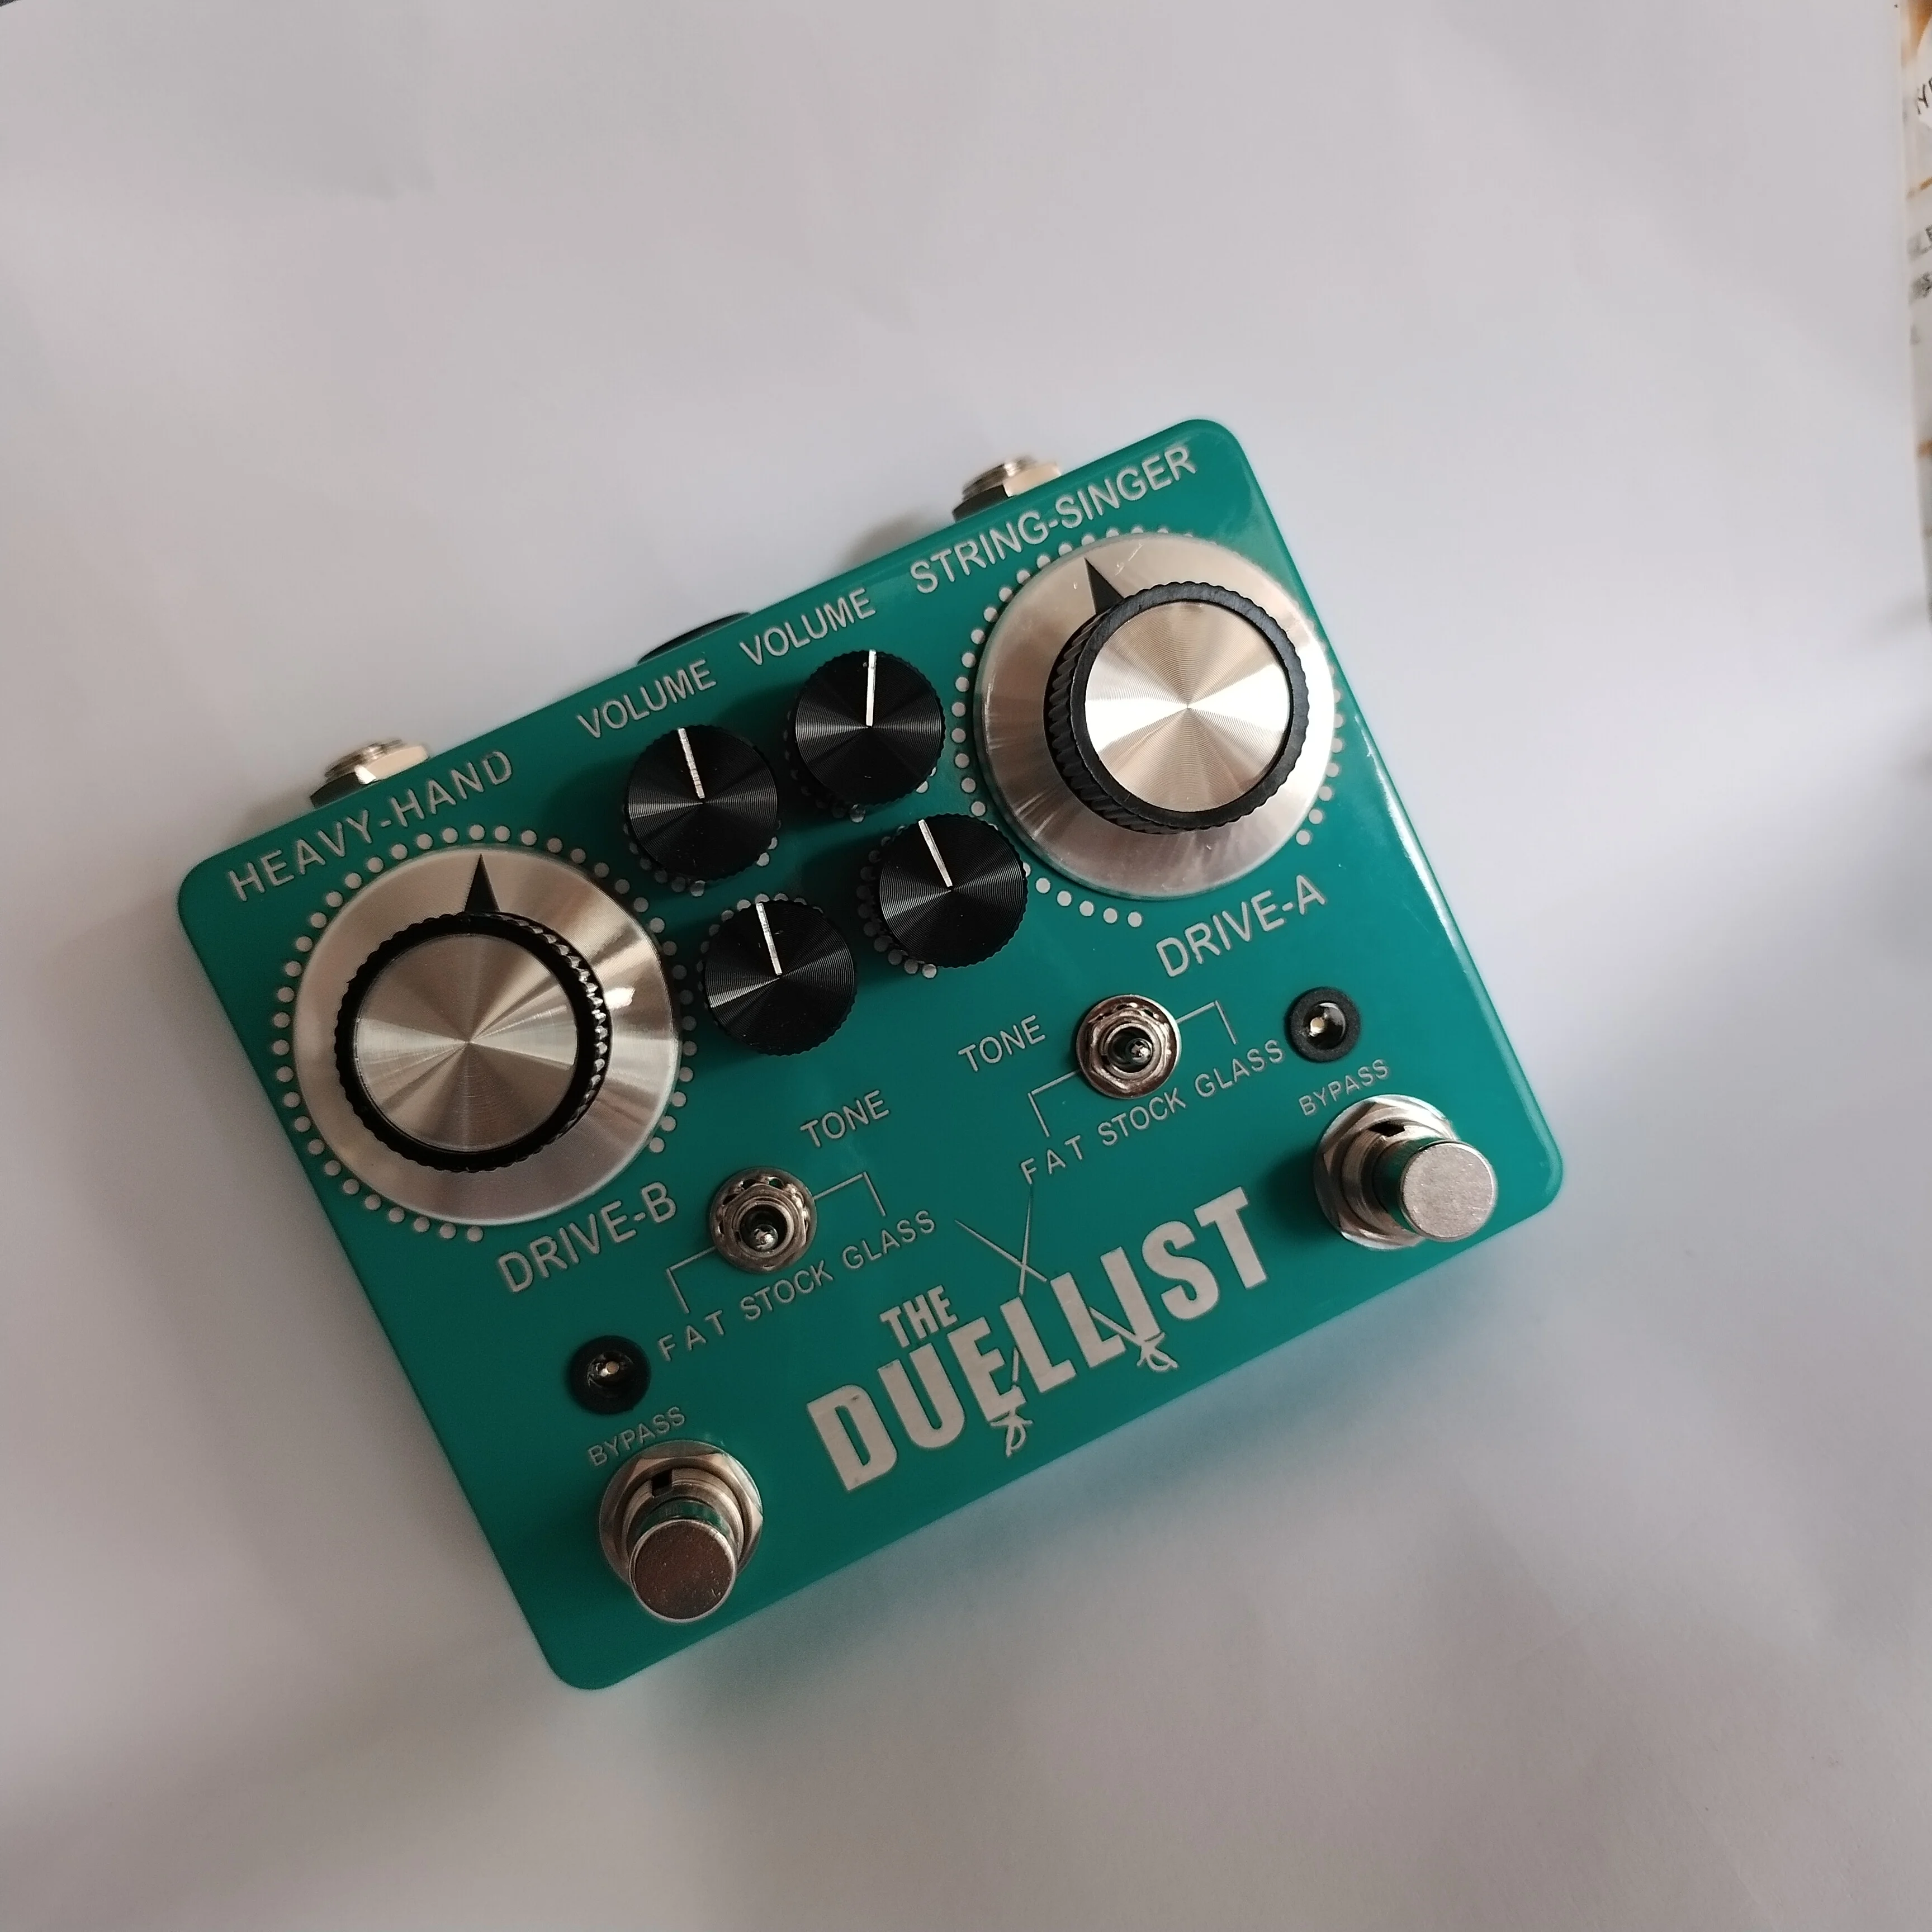 LILT King Tone Duellist Dual Channel Overload Distortion Guitar Pedal  Manual Pedal True Bypass enlarge